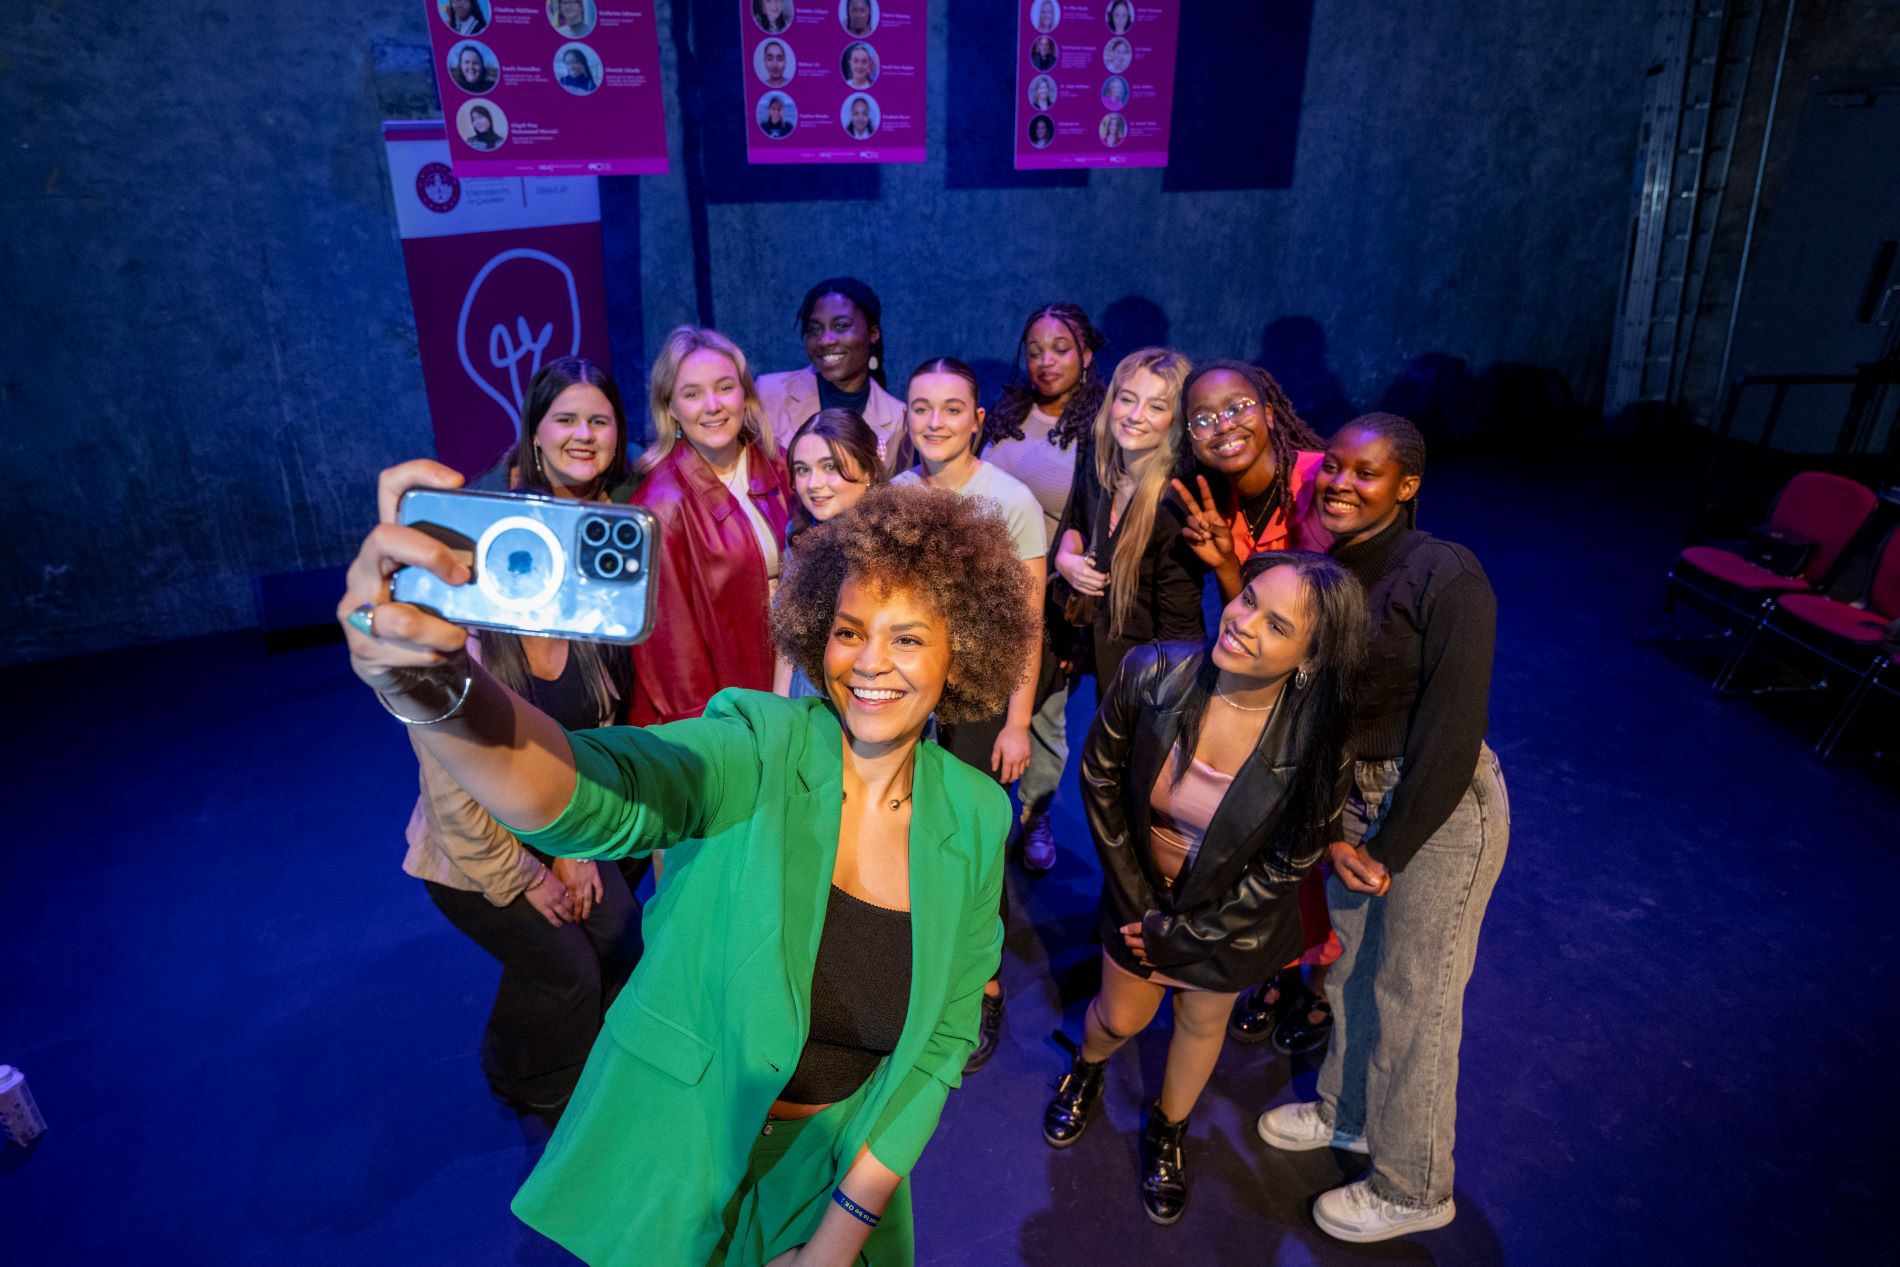 A group shot: photo of Emer O'Neill taking a selfie with a group of female students 